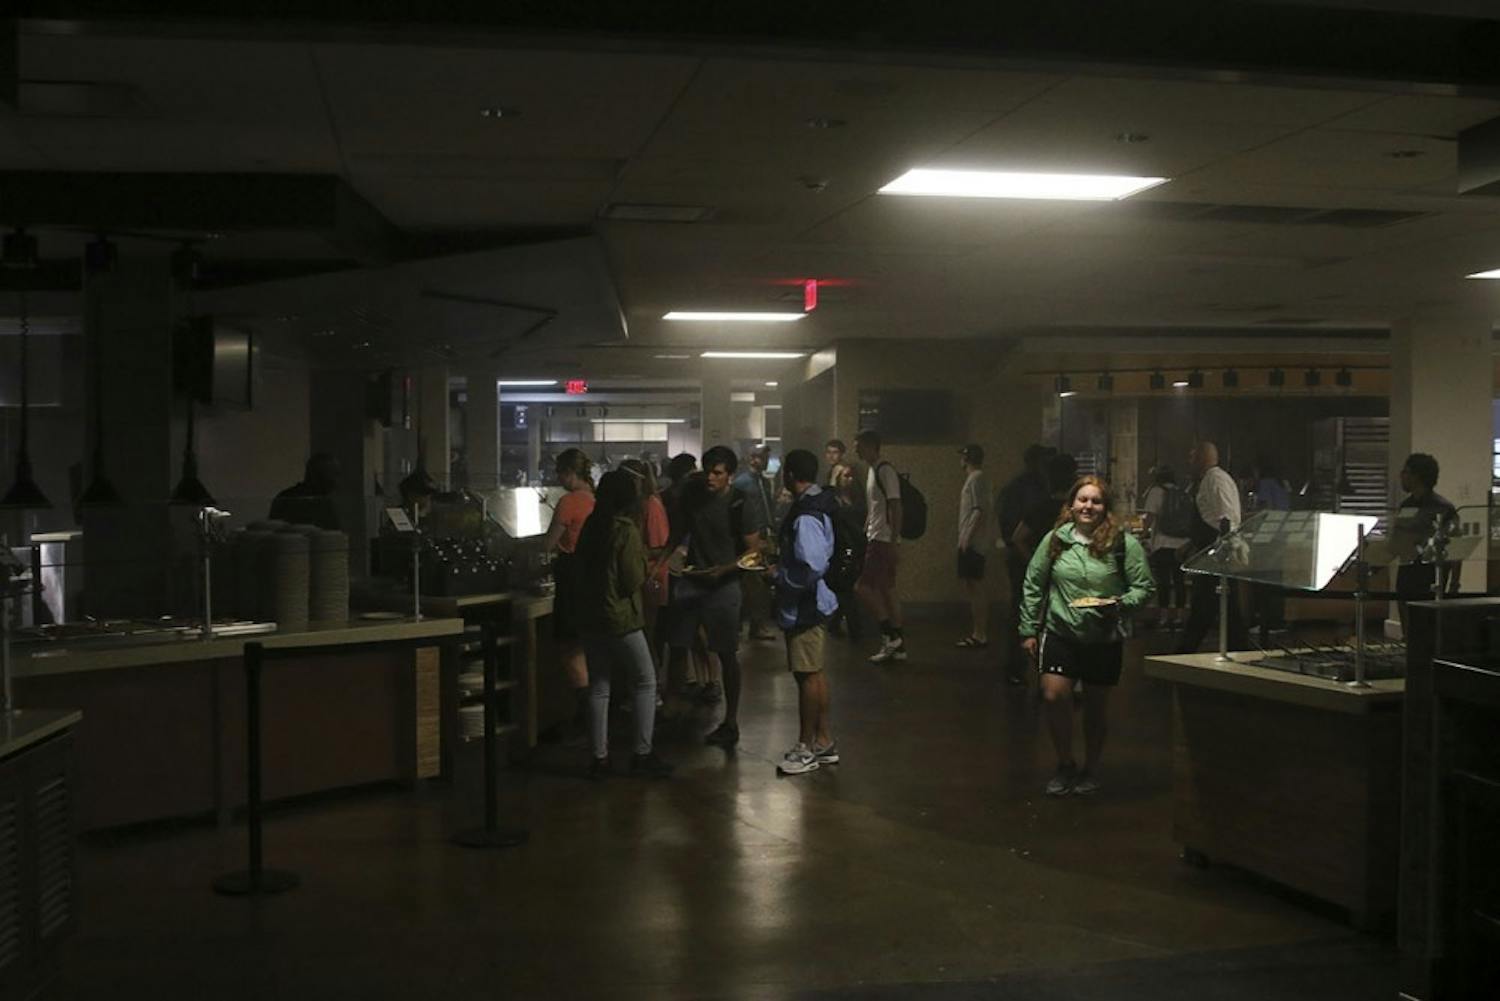 Lenoir dining hall lost power today.